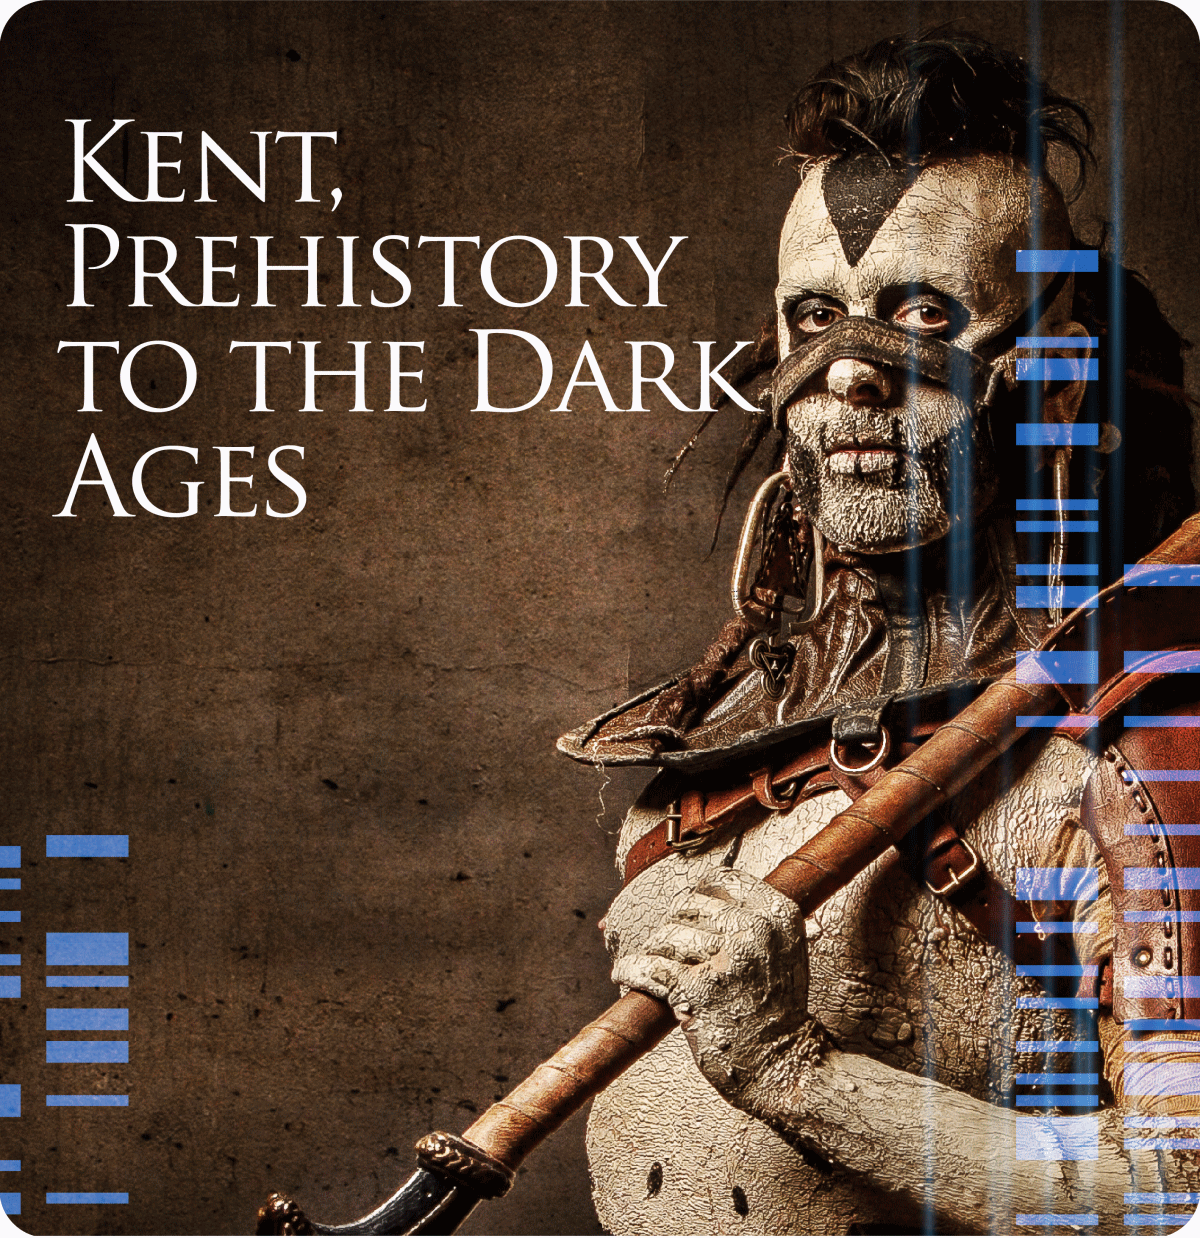 Kent, Prehistory to the Dark Ages